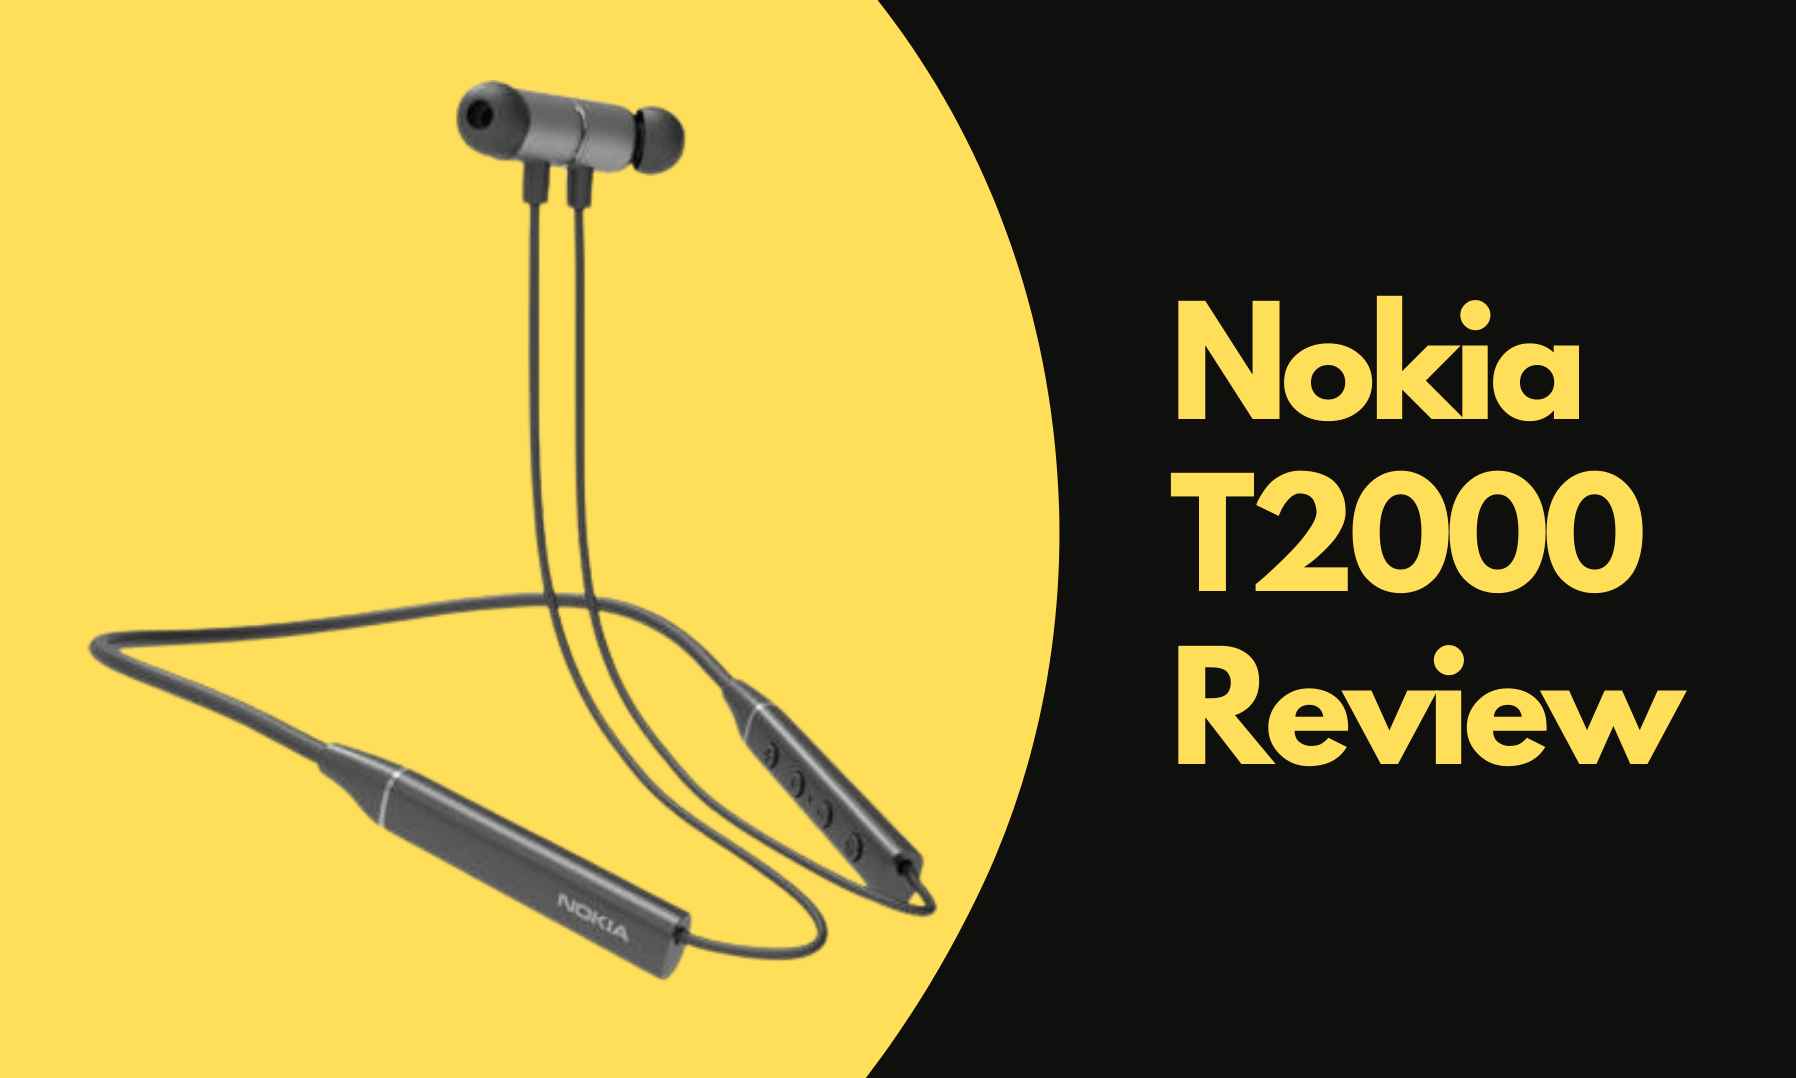 Nokia T2000 Review